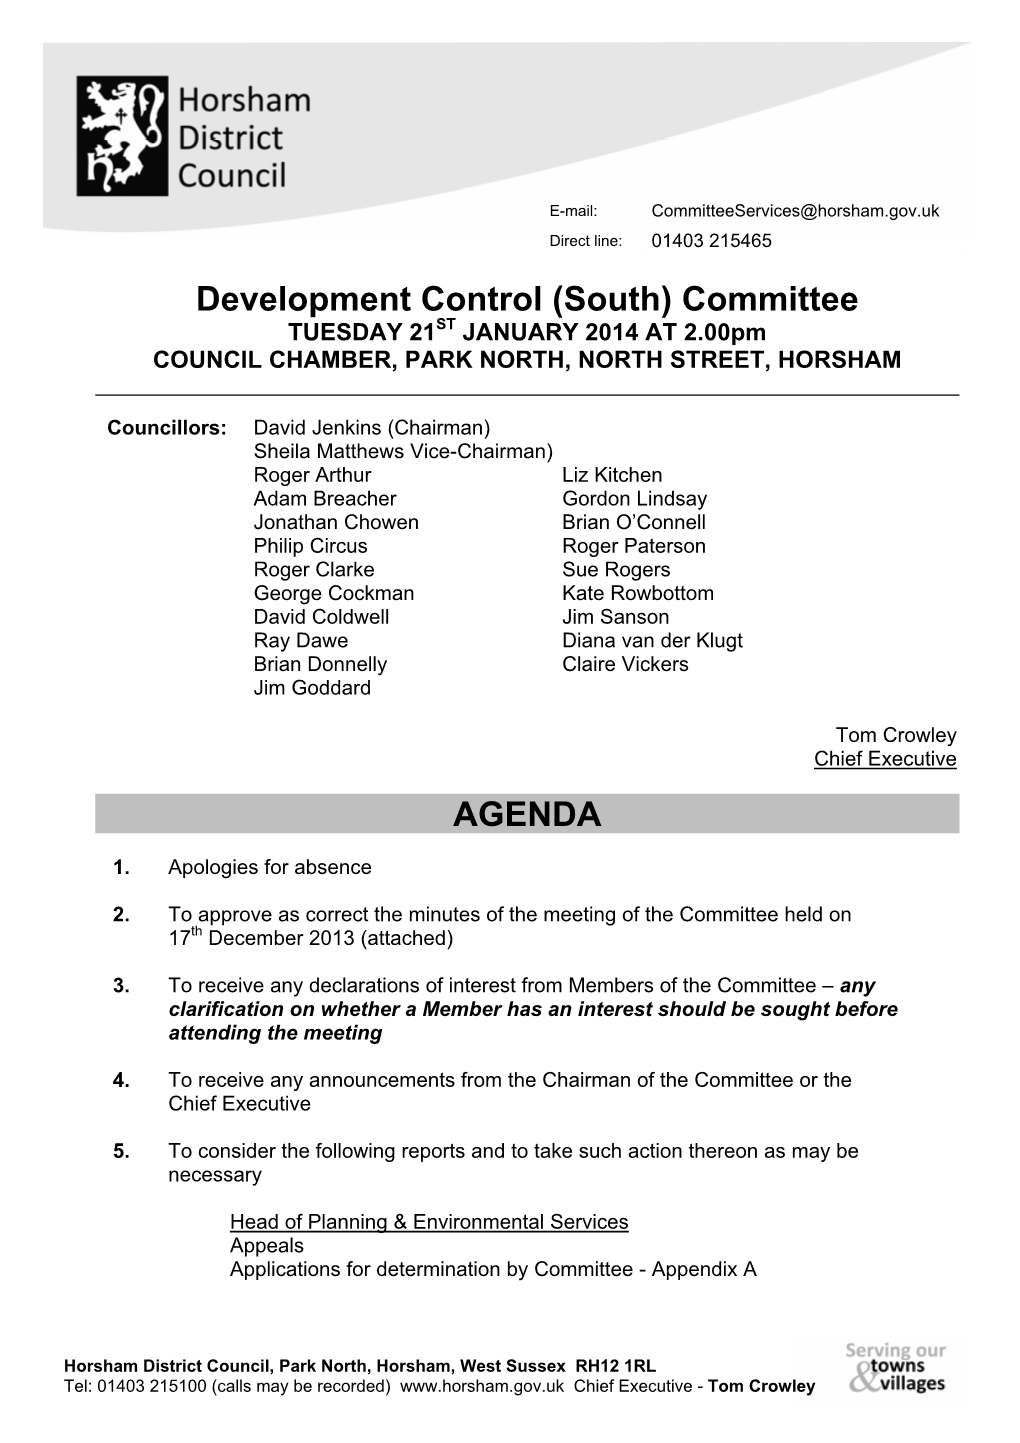 South) Committee TUESDAY 21ST JANUARY 2014 at 2.00Pm COUNCIL CHAMBER, PARK NORTH, NORTH STREET, HORSHAM